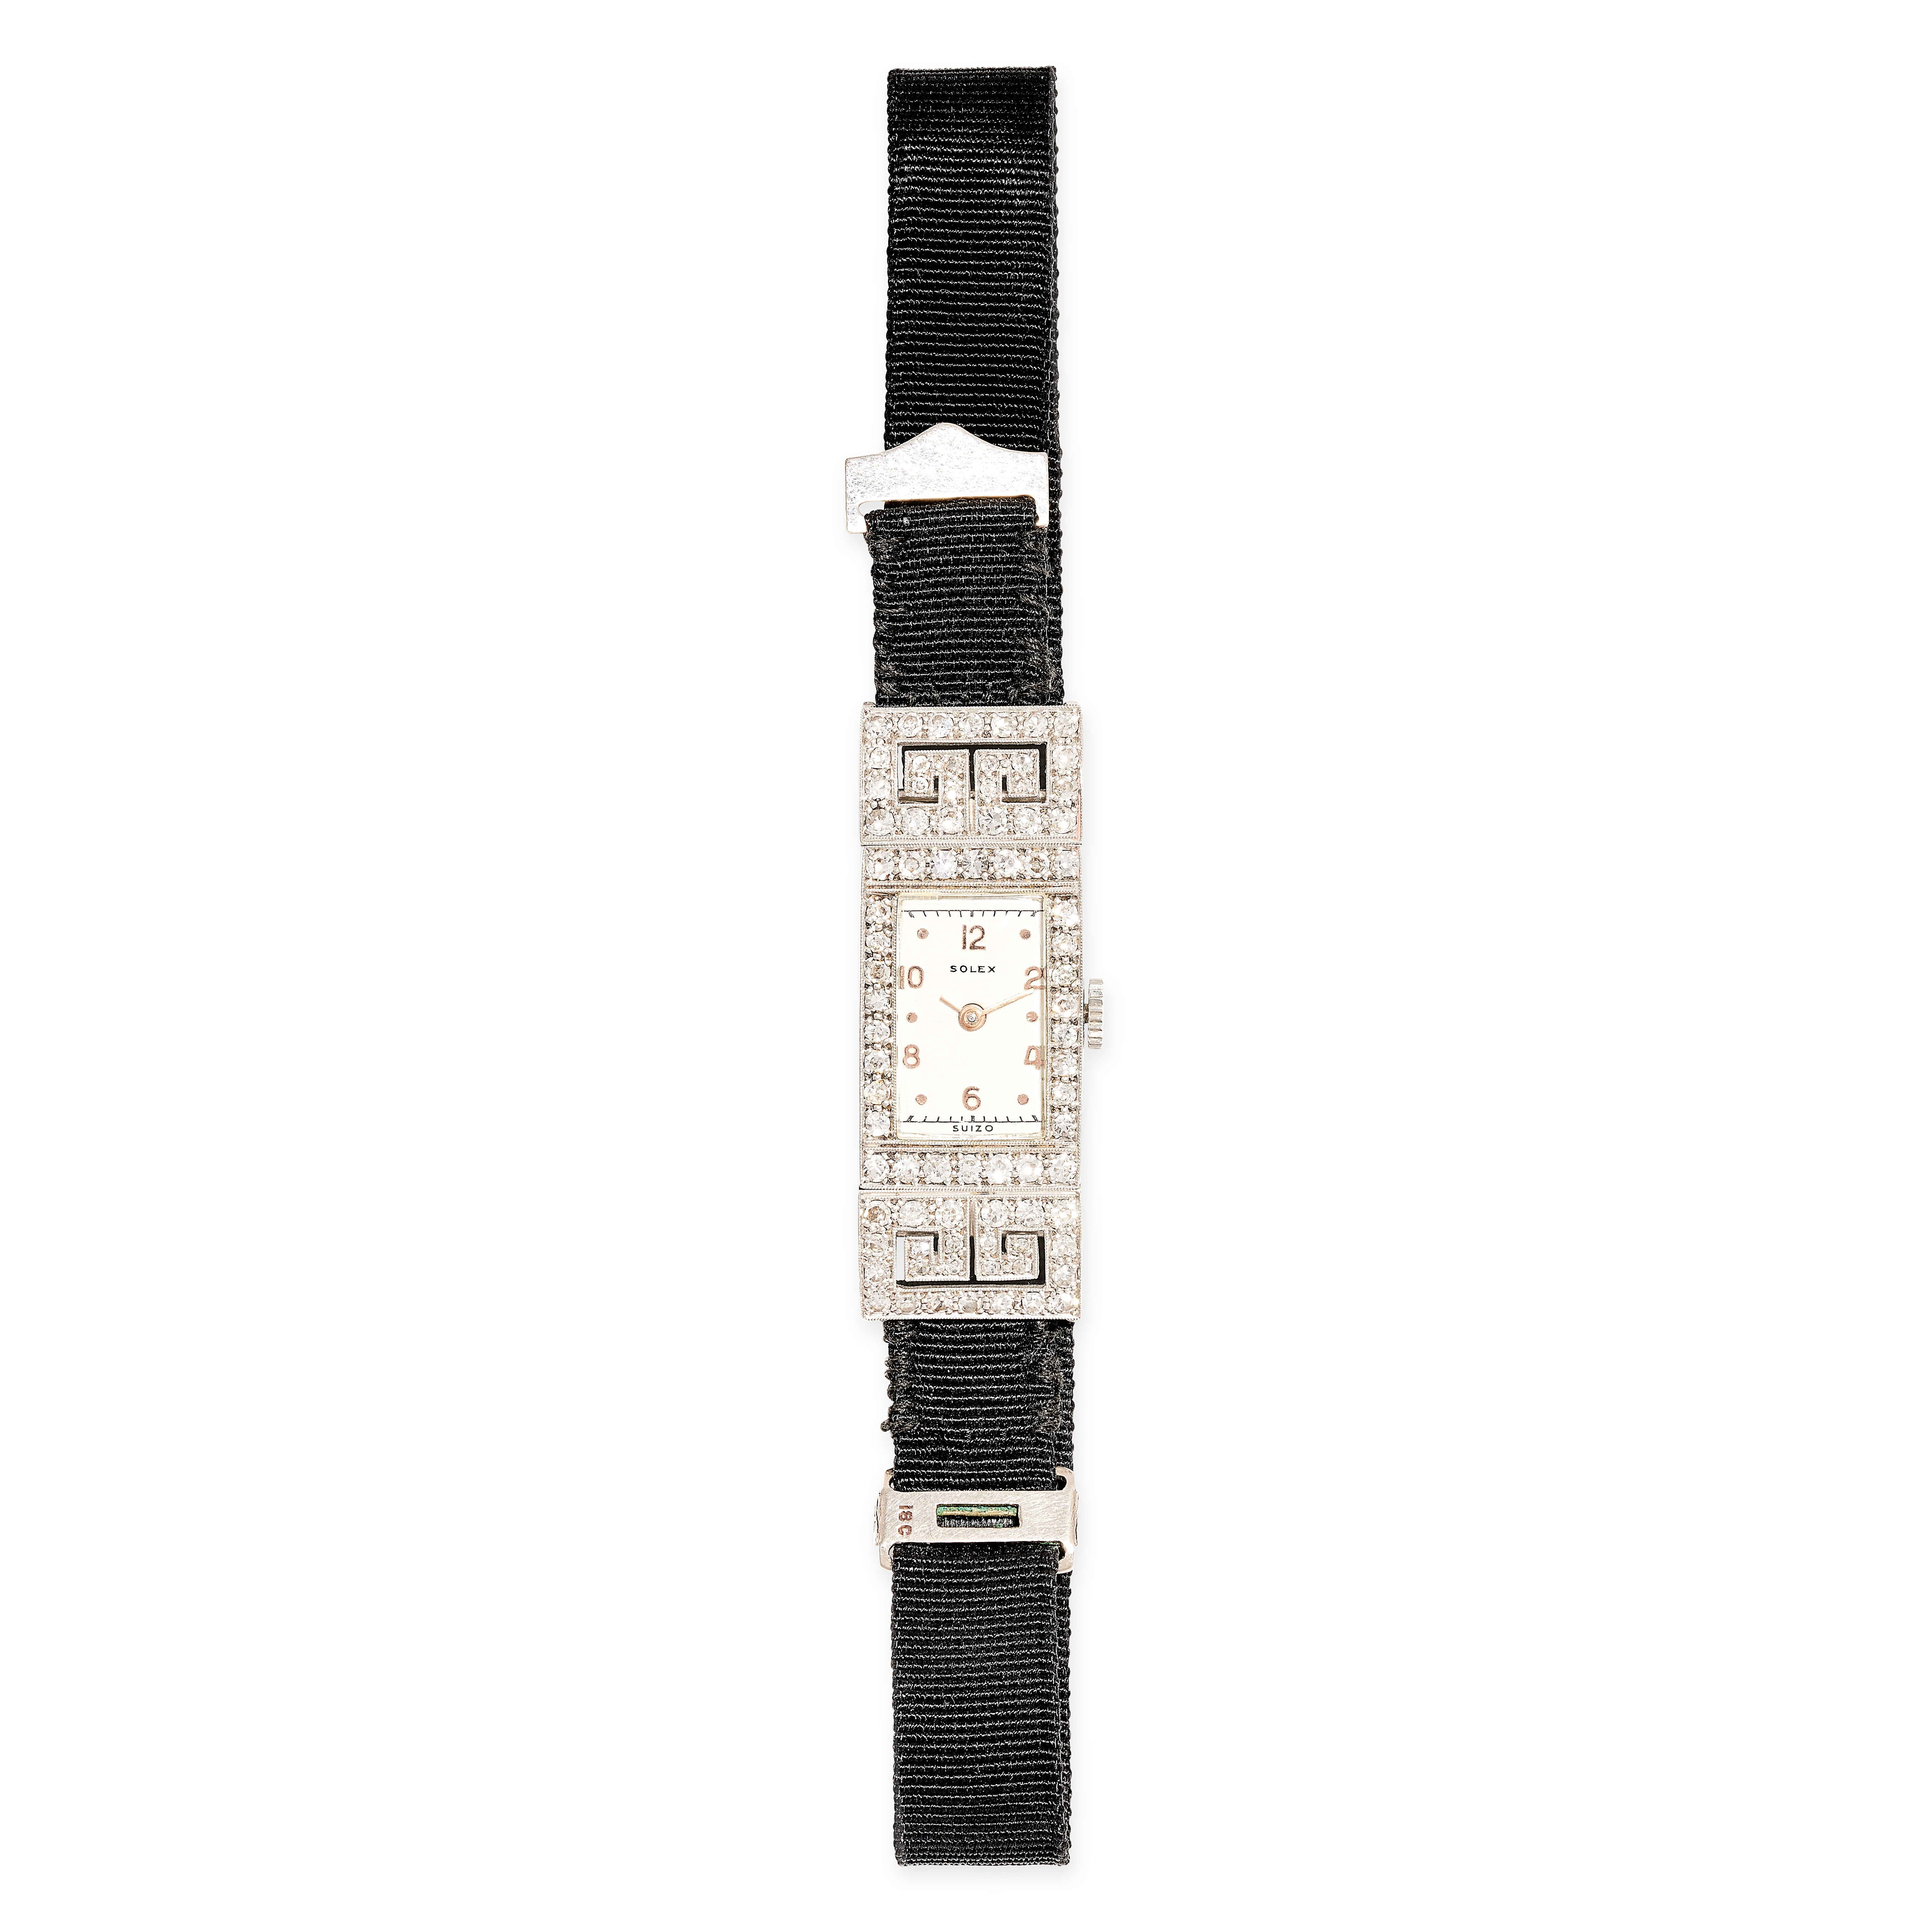 AN ART DECO LADIES DIAMOND COCKTAIL WATCH in platinum and 18ct white gold, the rectangular face